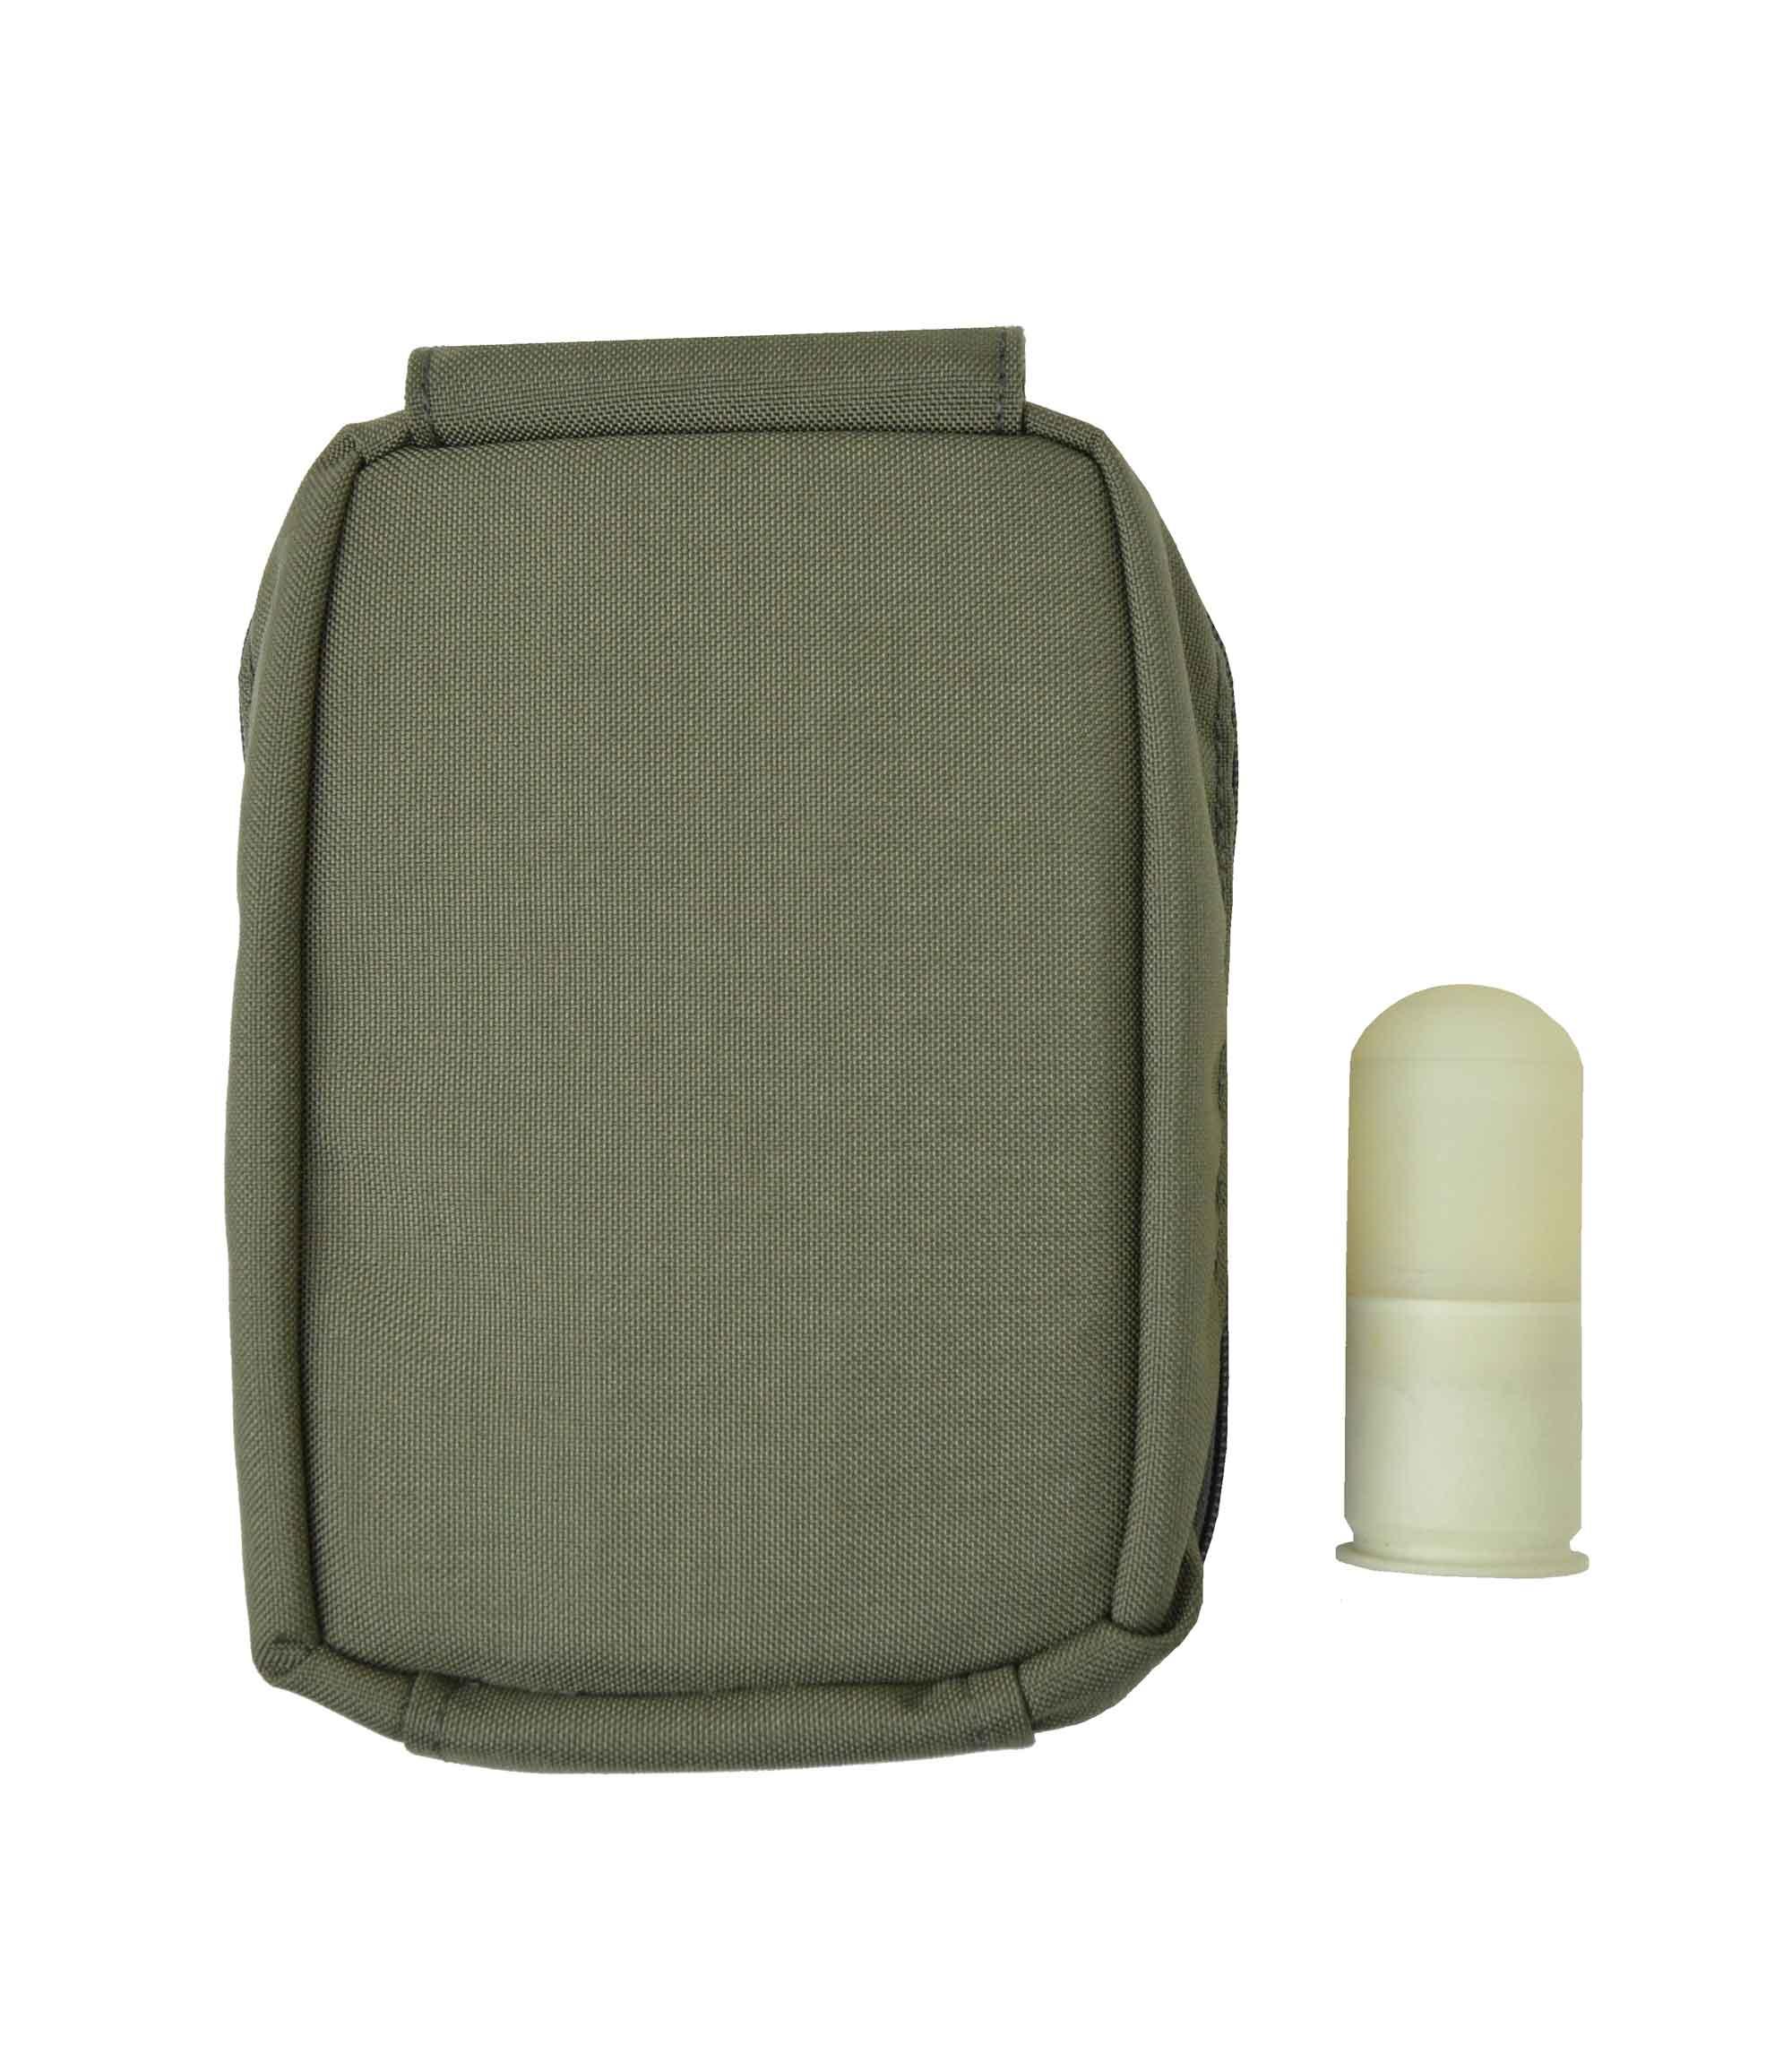 Less Lethal 37mm / 40mm Pouch | Bushido Tactical